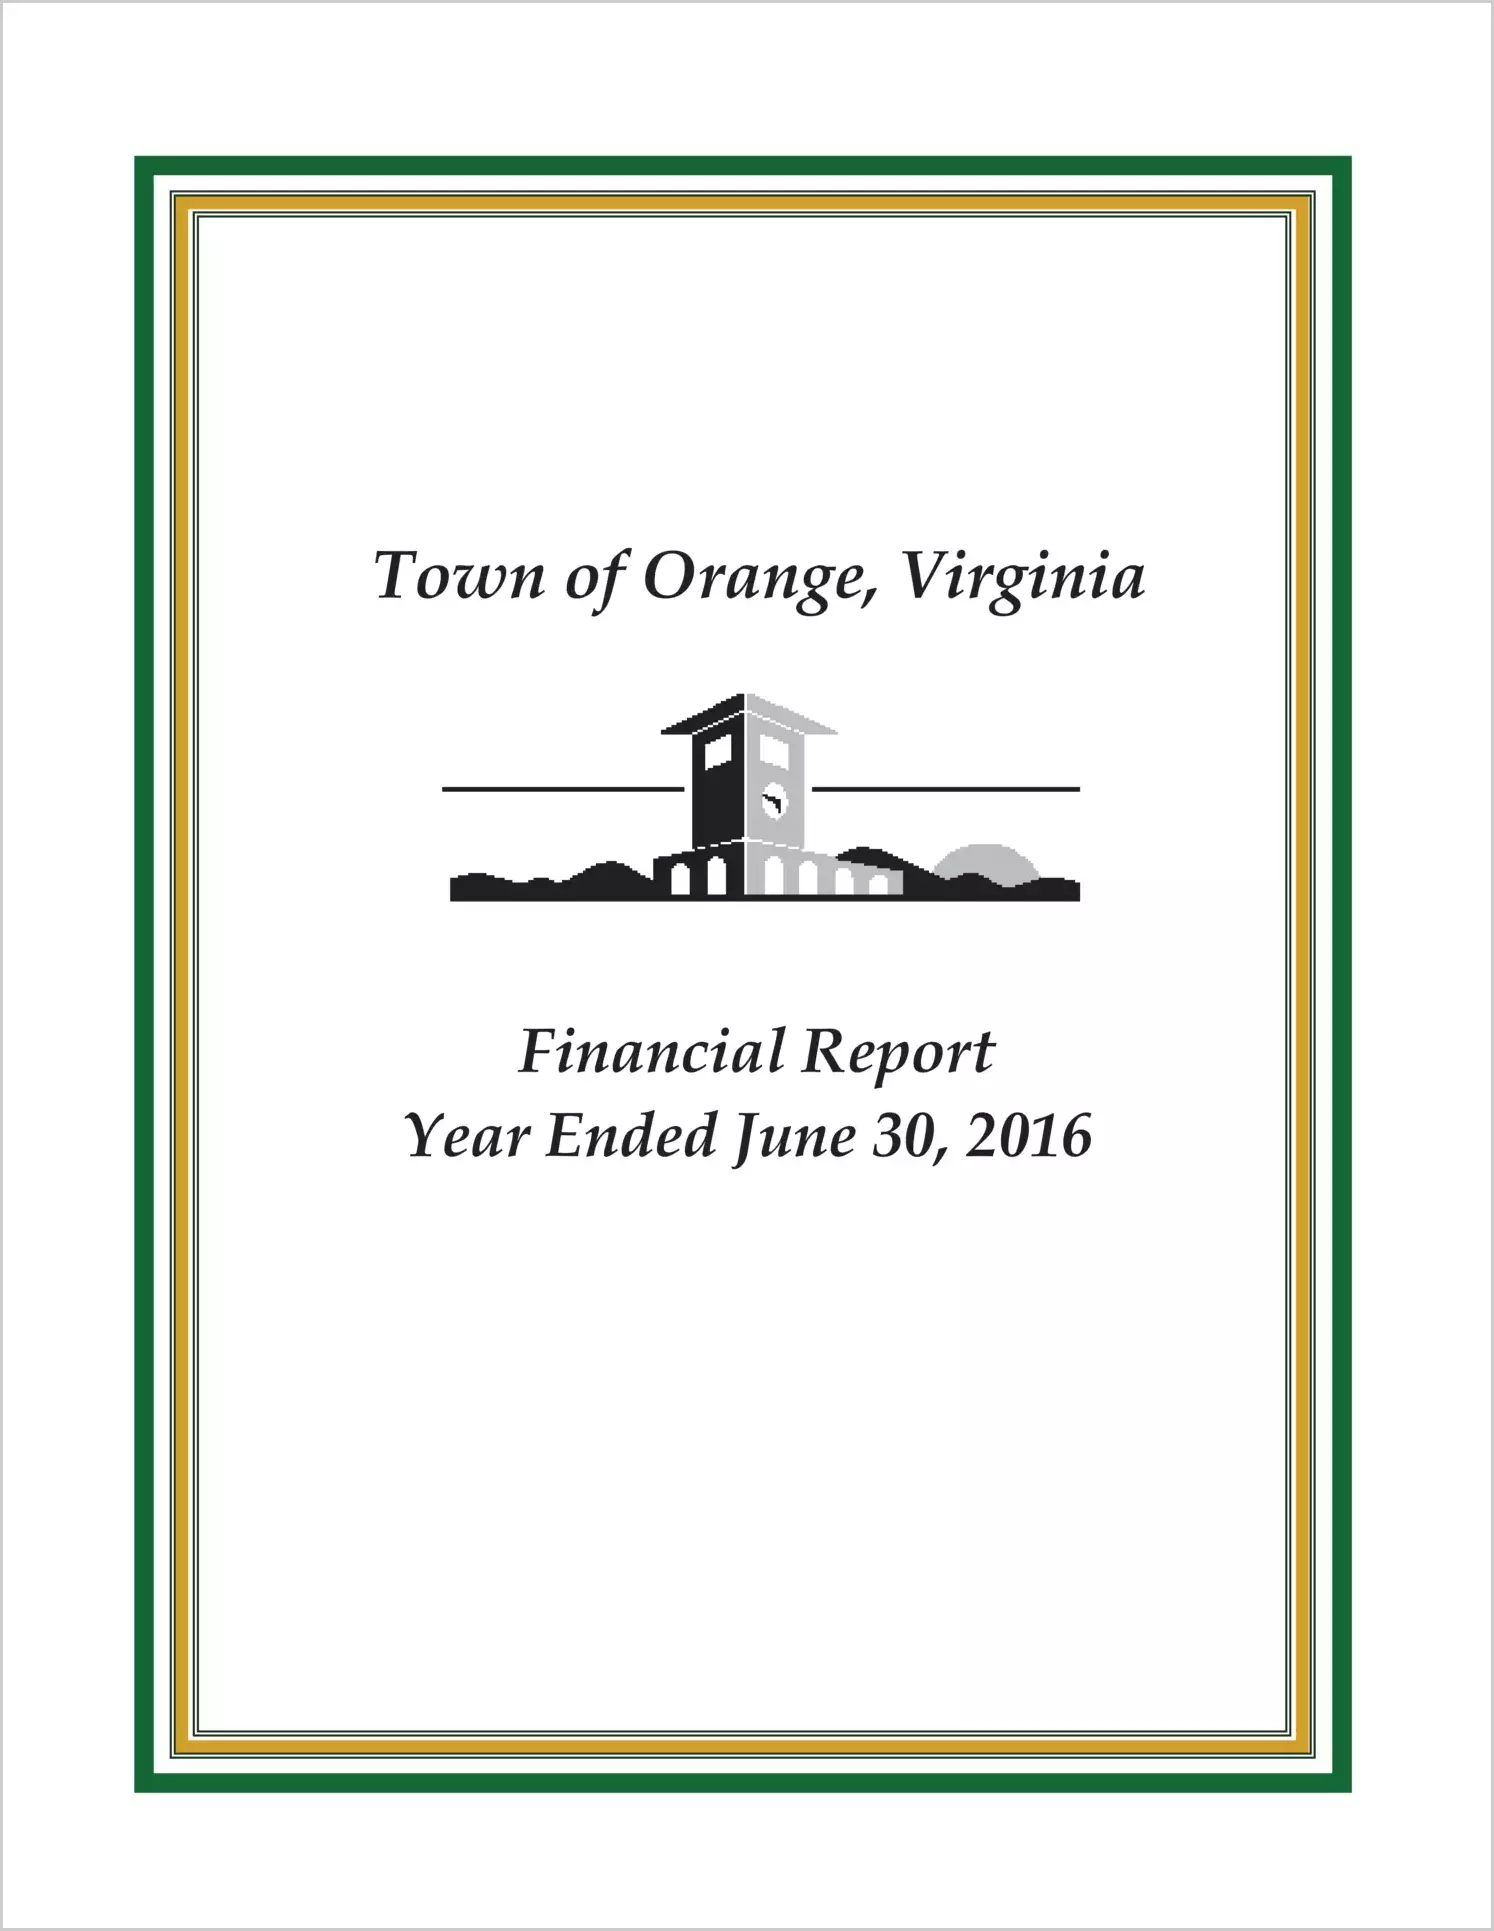 2016 Annual Financial Report for Town of Orange